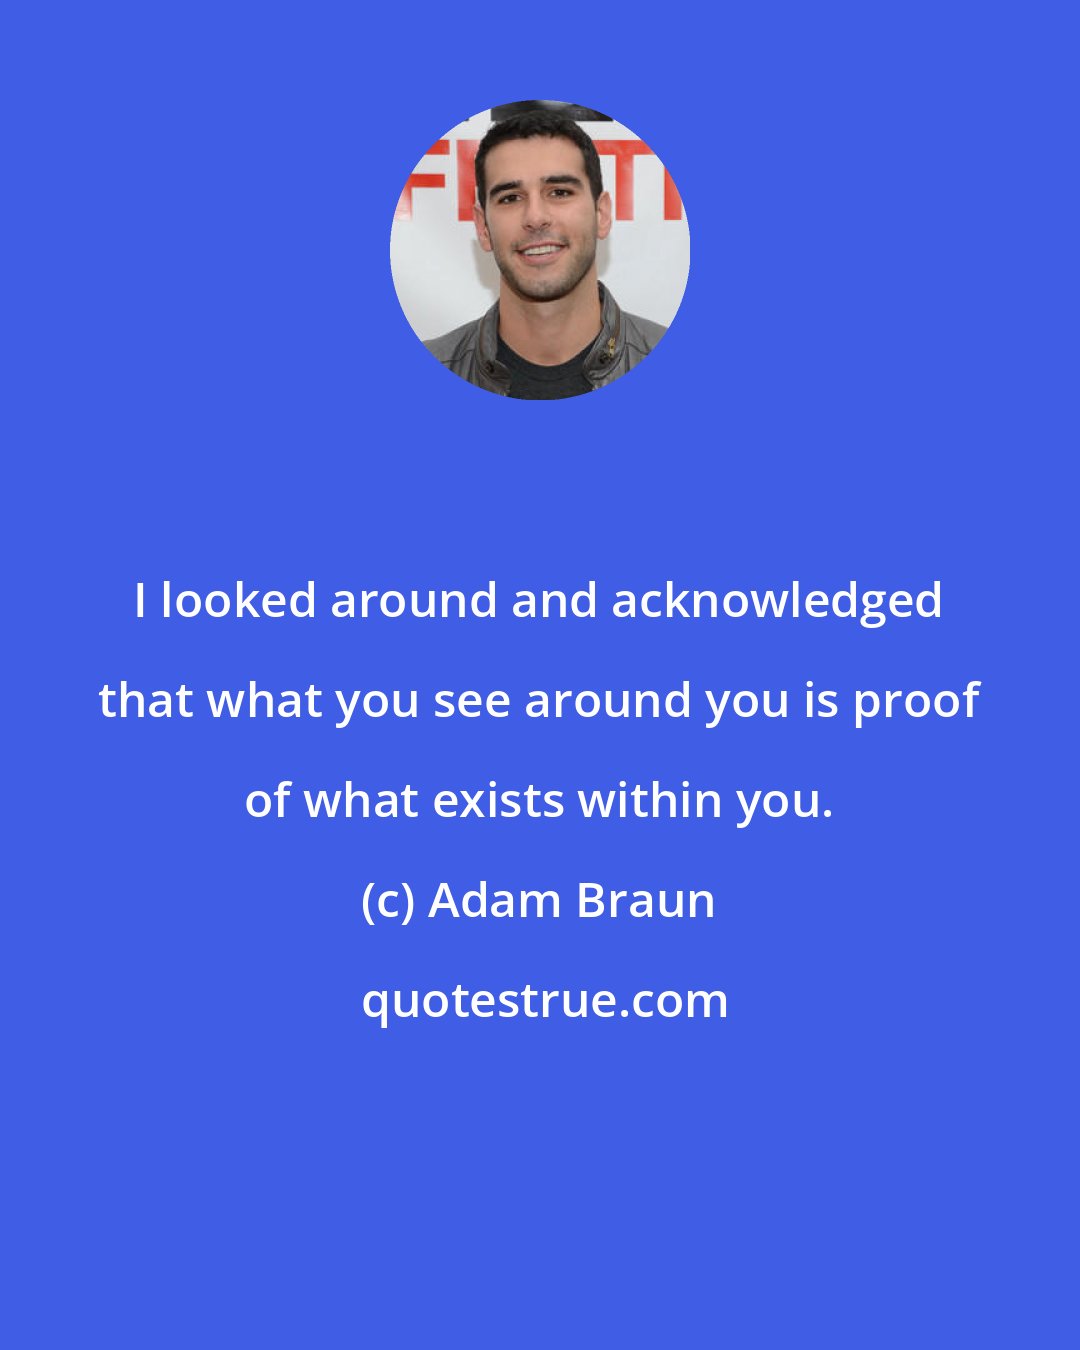 Adam Braun: I looked around and acknowledged that what you see around you is proof of what exists within you.